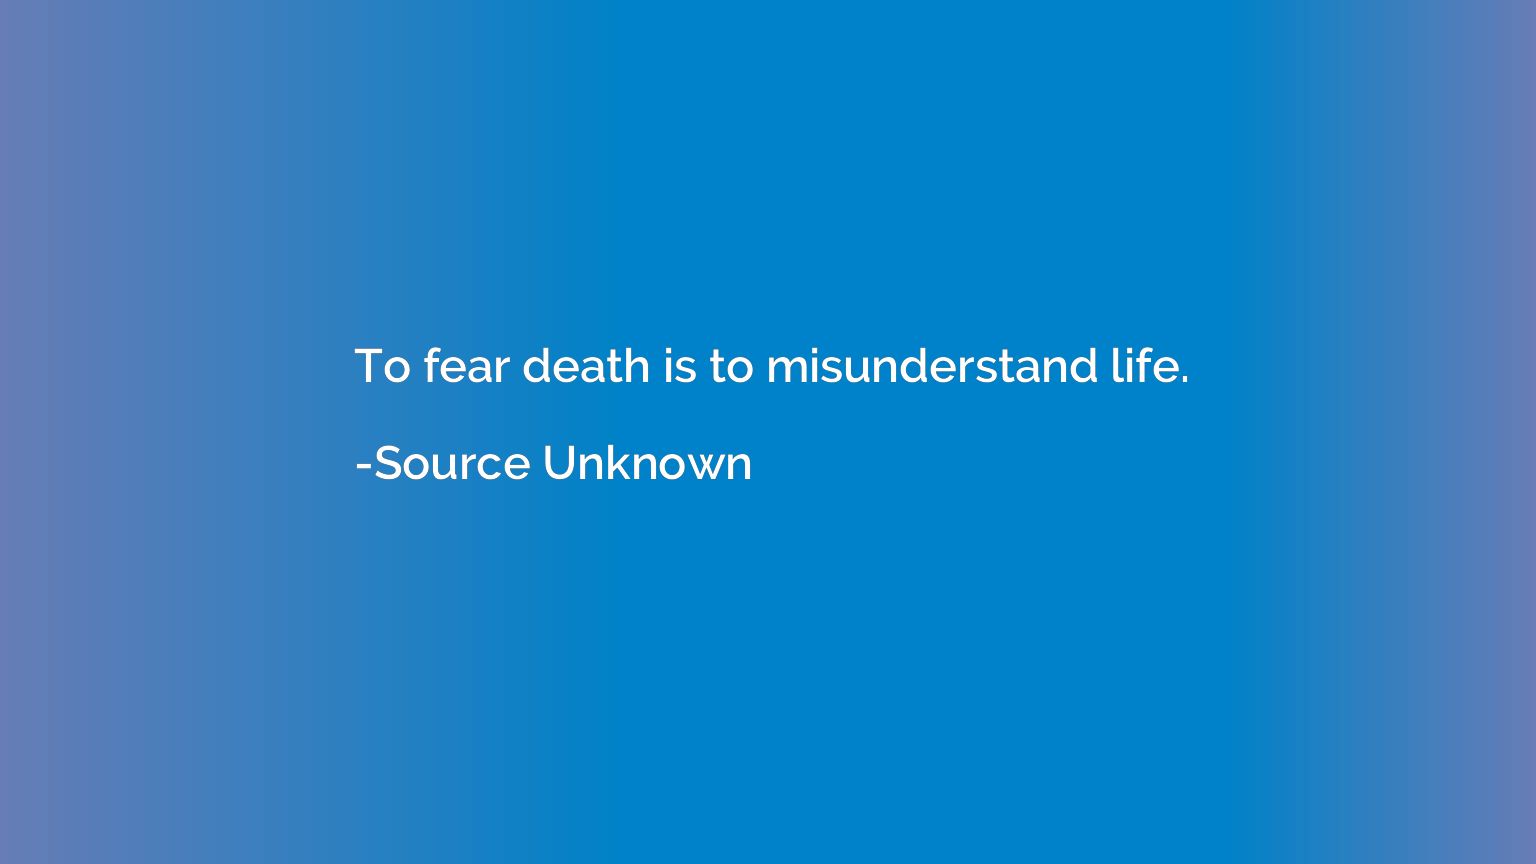 To fear death is to misunderstand life.